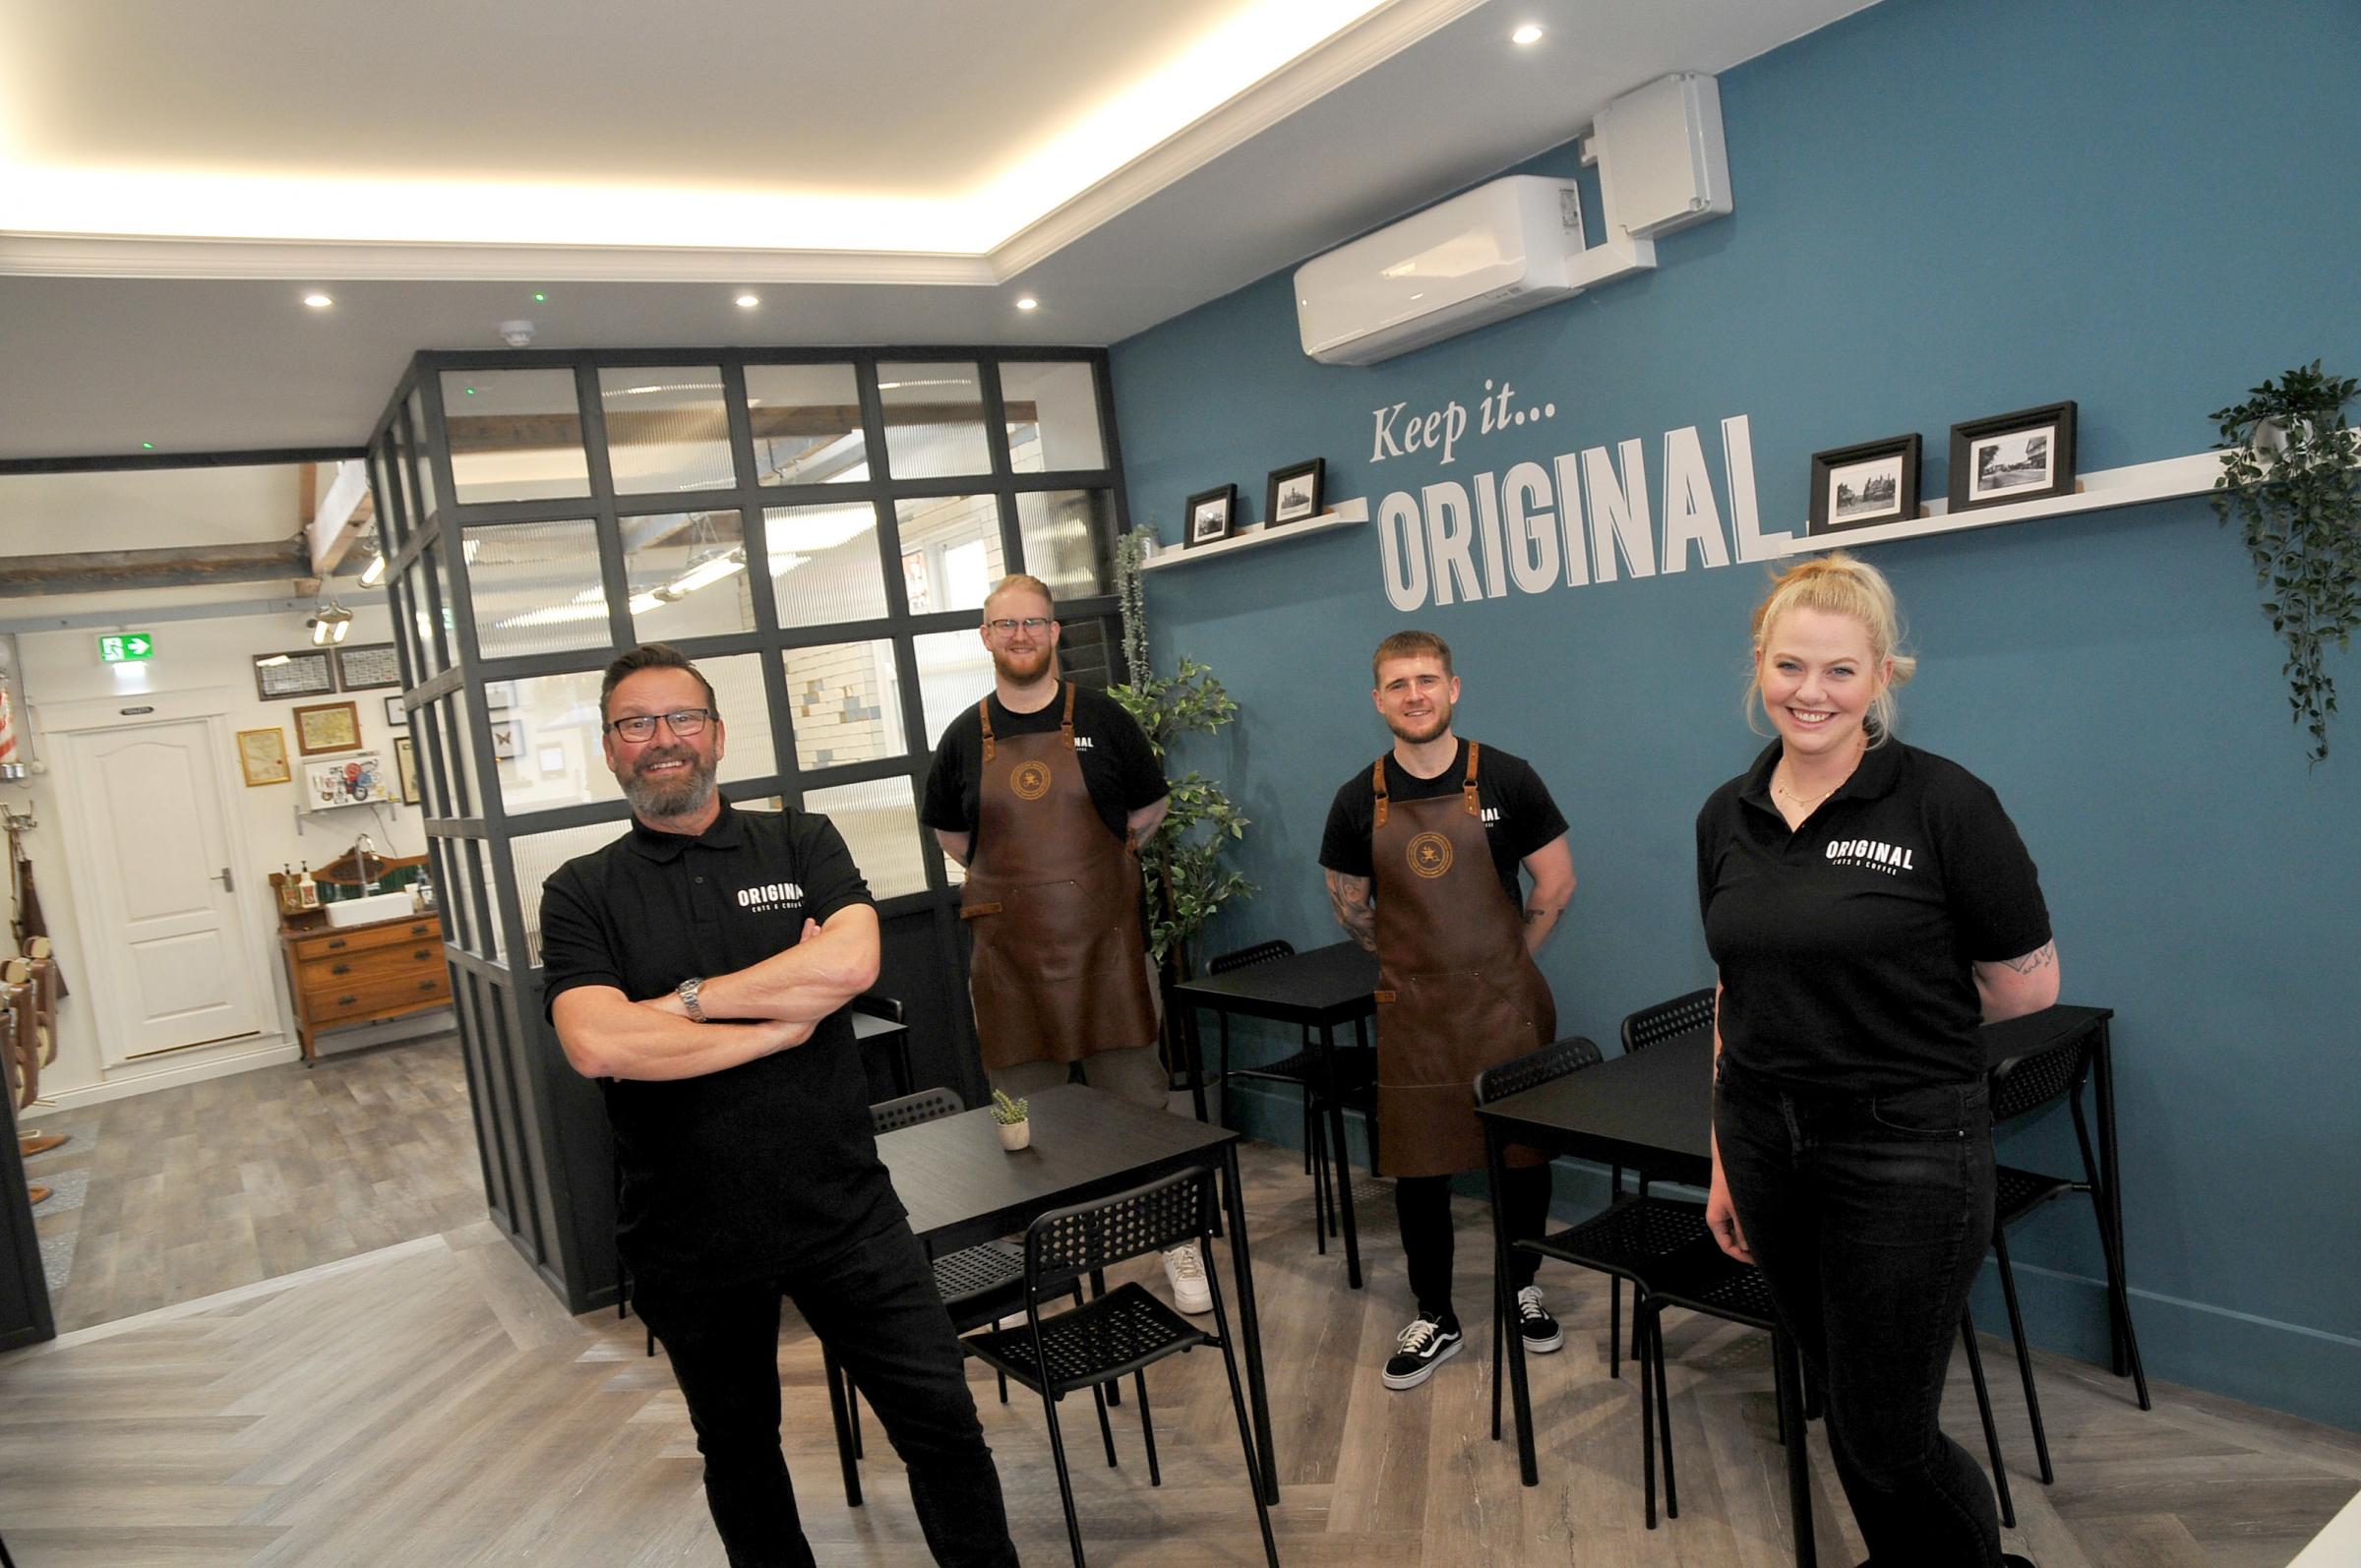 The Original Coffee and Cuts team